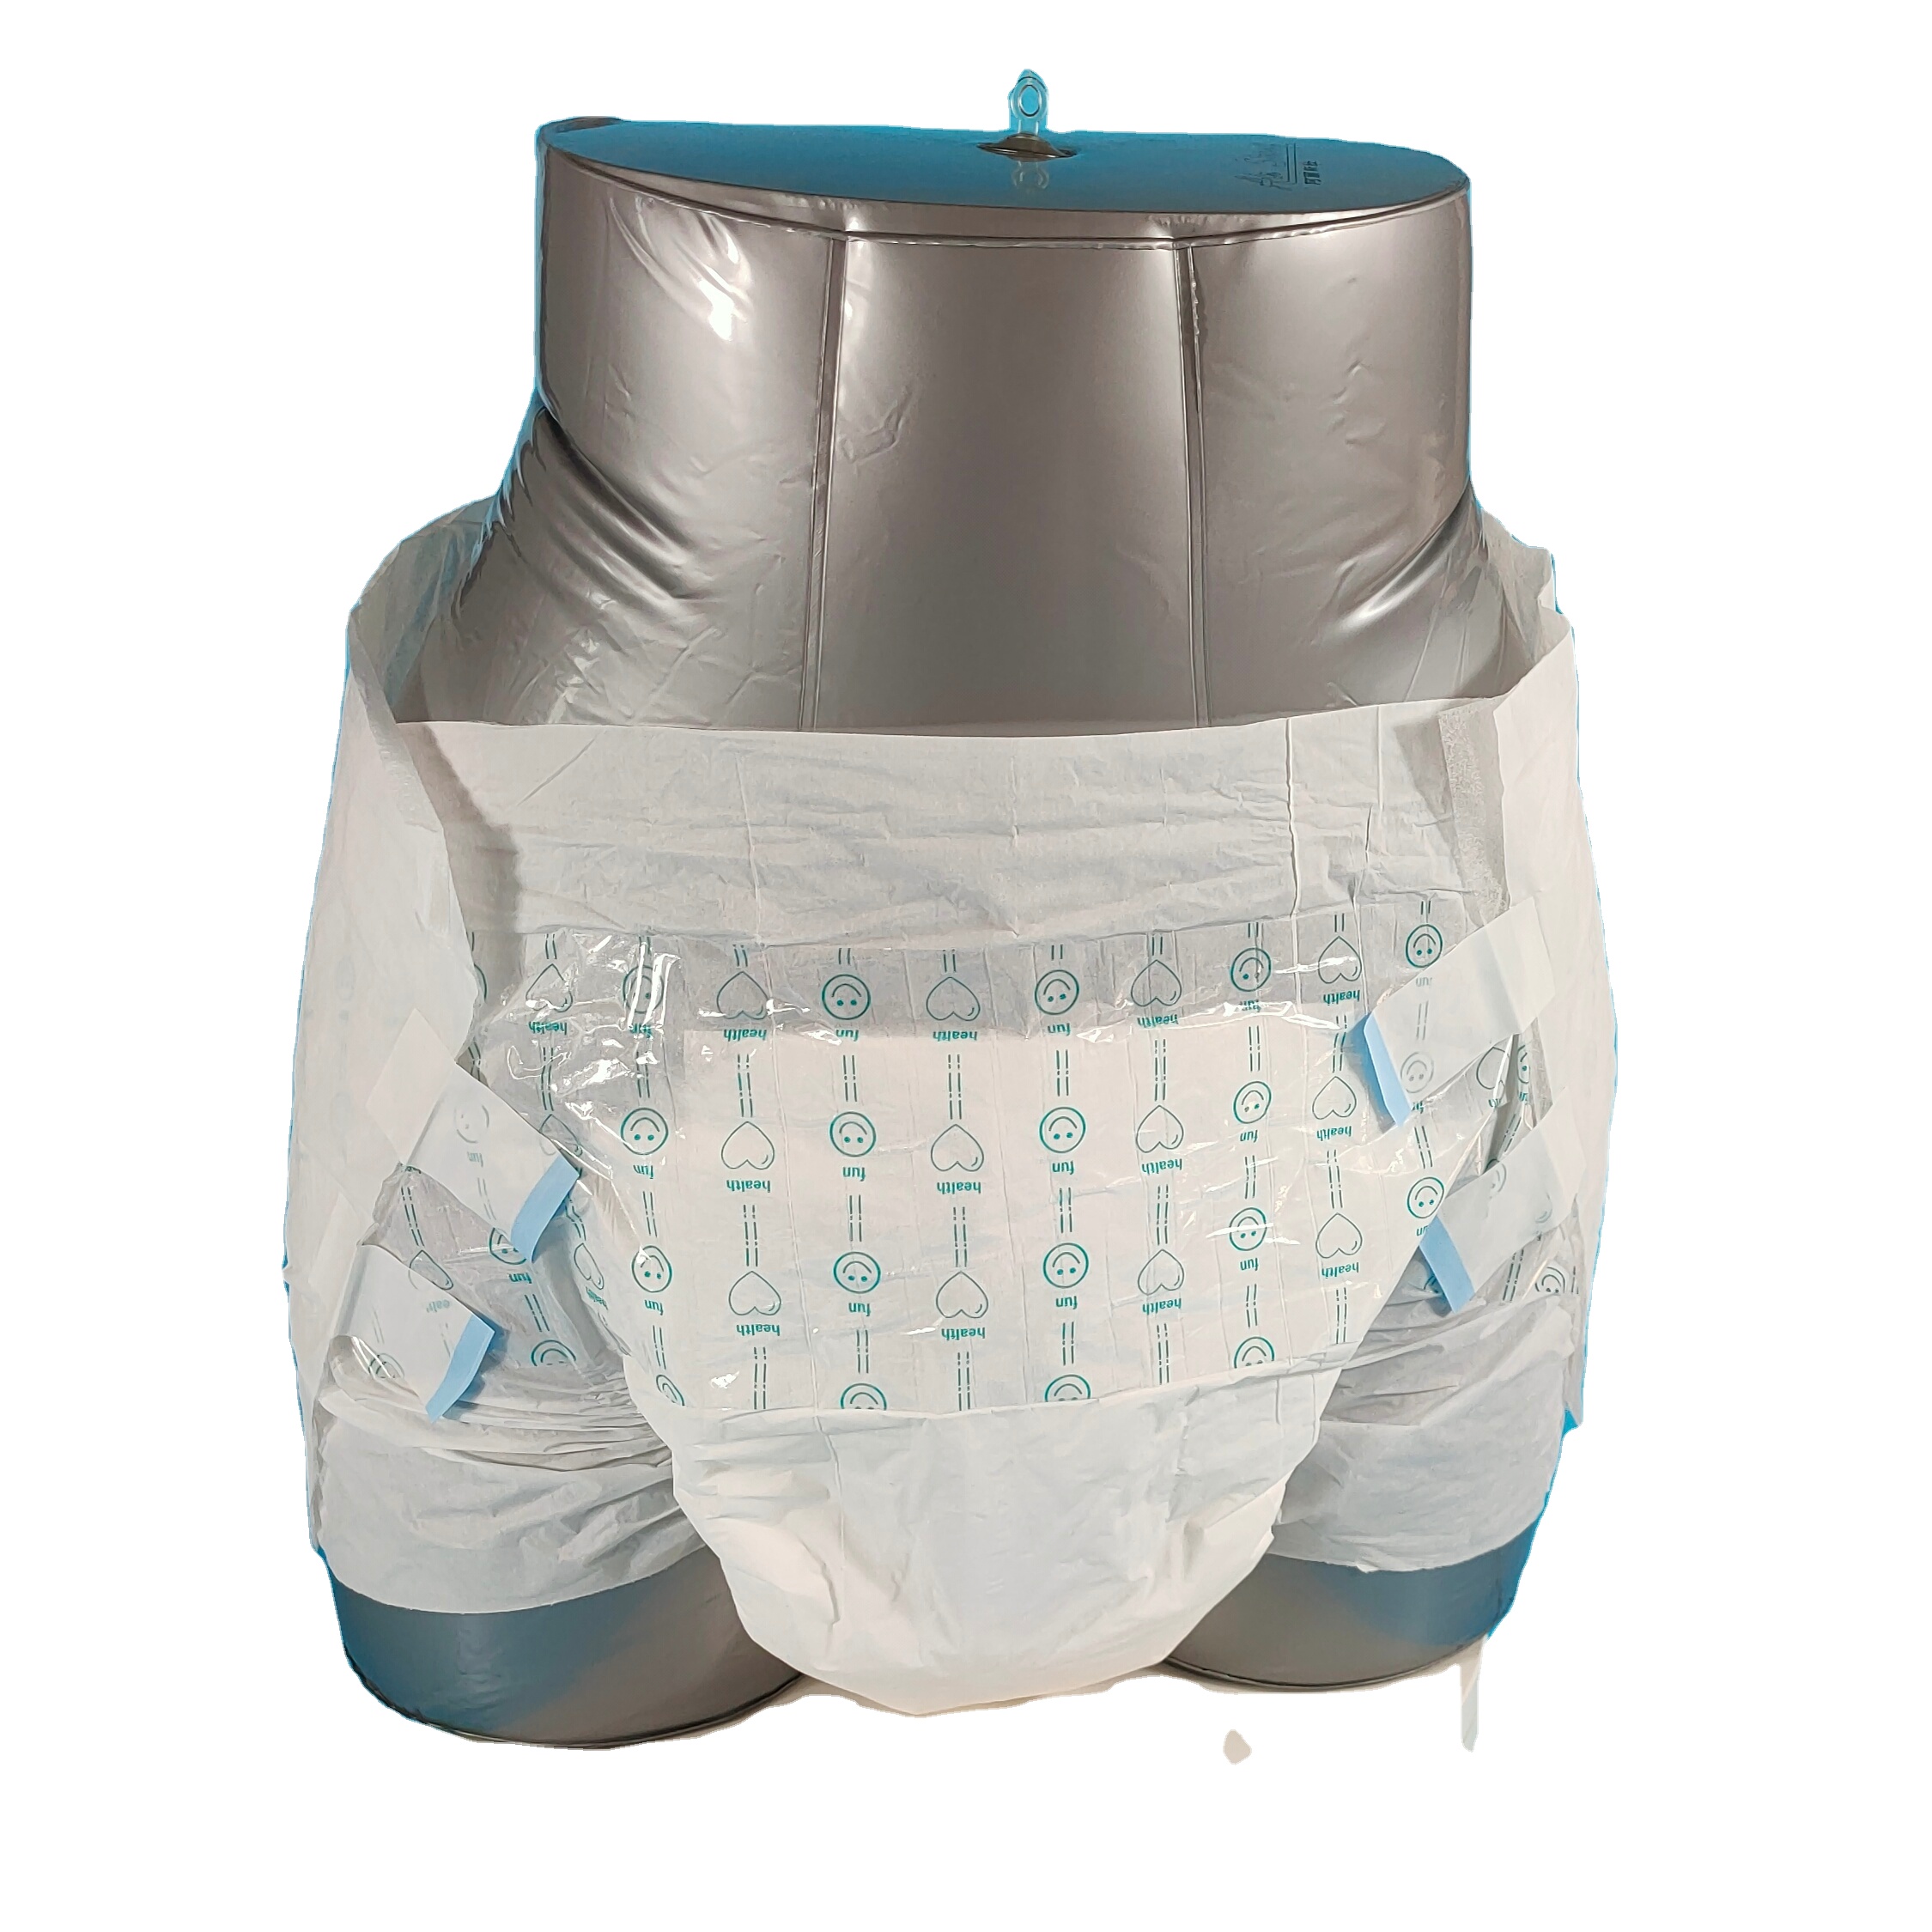 OEM customized adult diaper with dry surface disposable adult brief with quick absorbency china manufacturer 